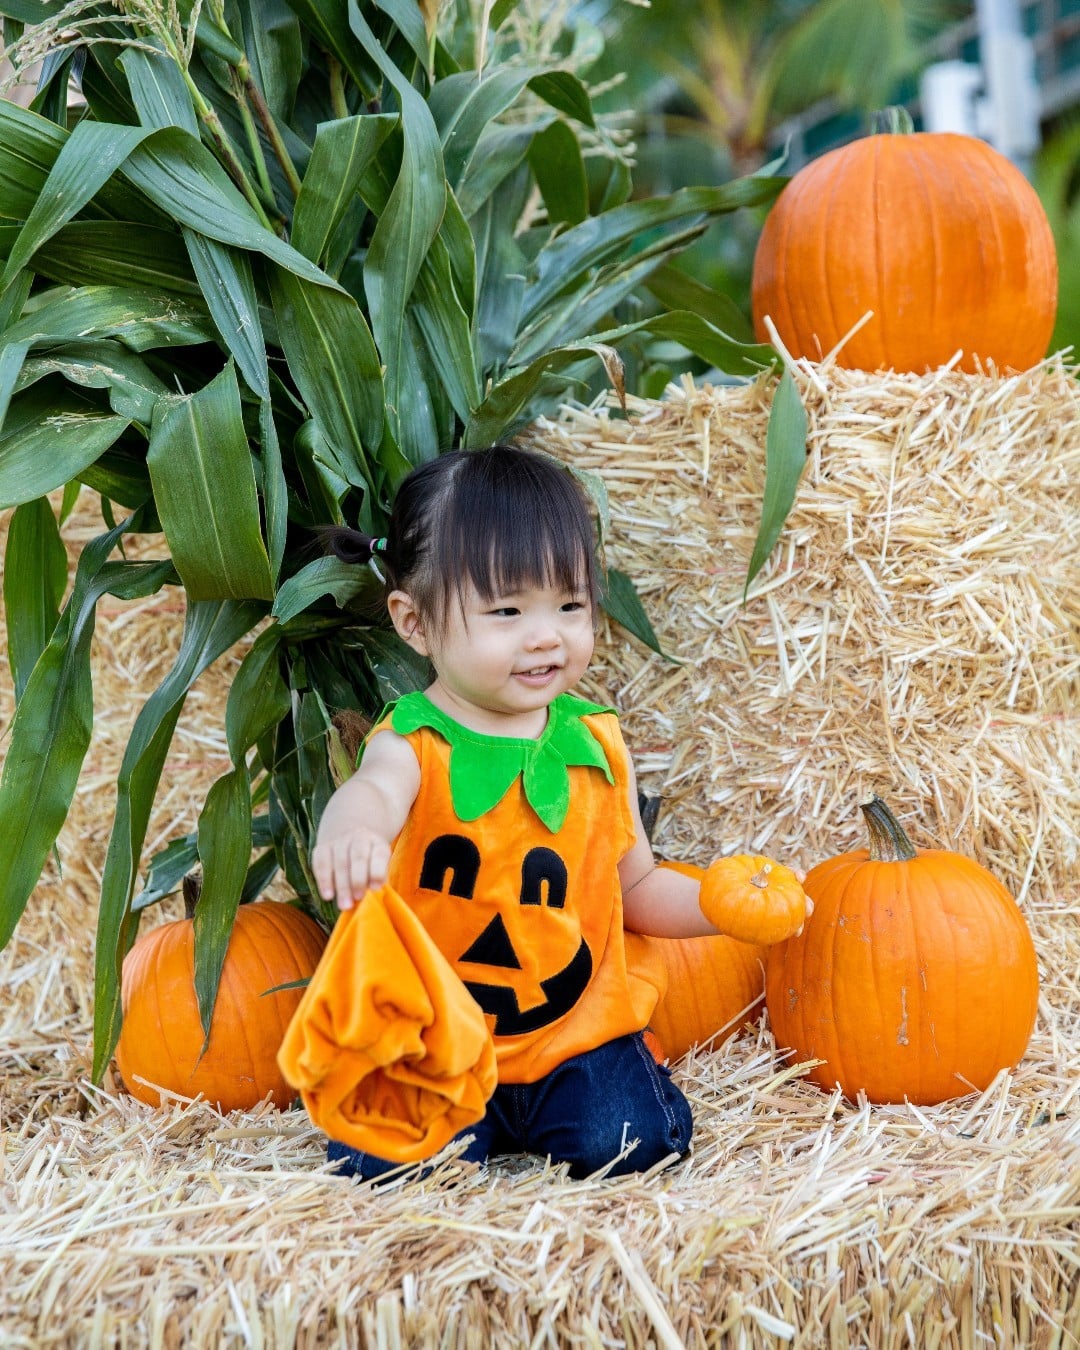 Discover all things autumn at our Halloween Celebration & Pumpkin Patch on Saturday, October 29 from 10am - 1pm at Victoria Ward Park. Arrive early to pick out a pumpkin, decorate a Halloween mask, treat yourself to a shave ice and snap your best spooky or silly picture, while supplies last.